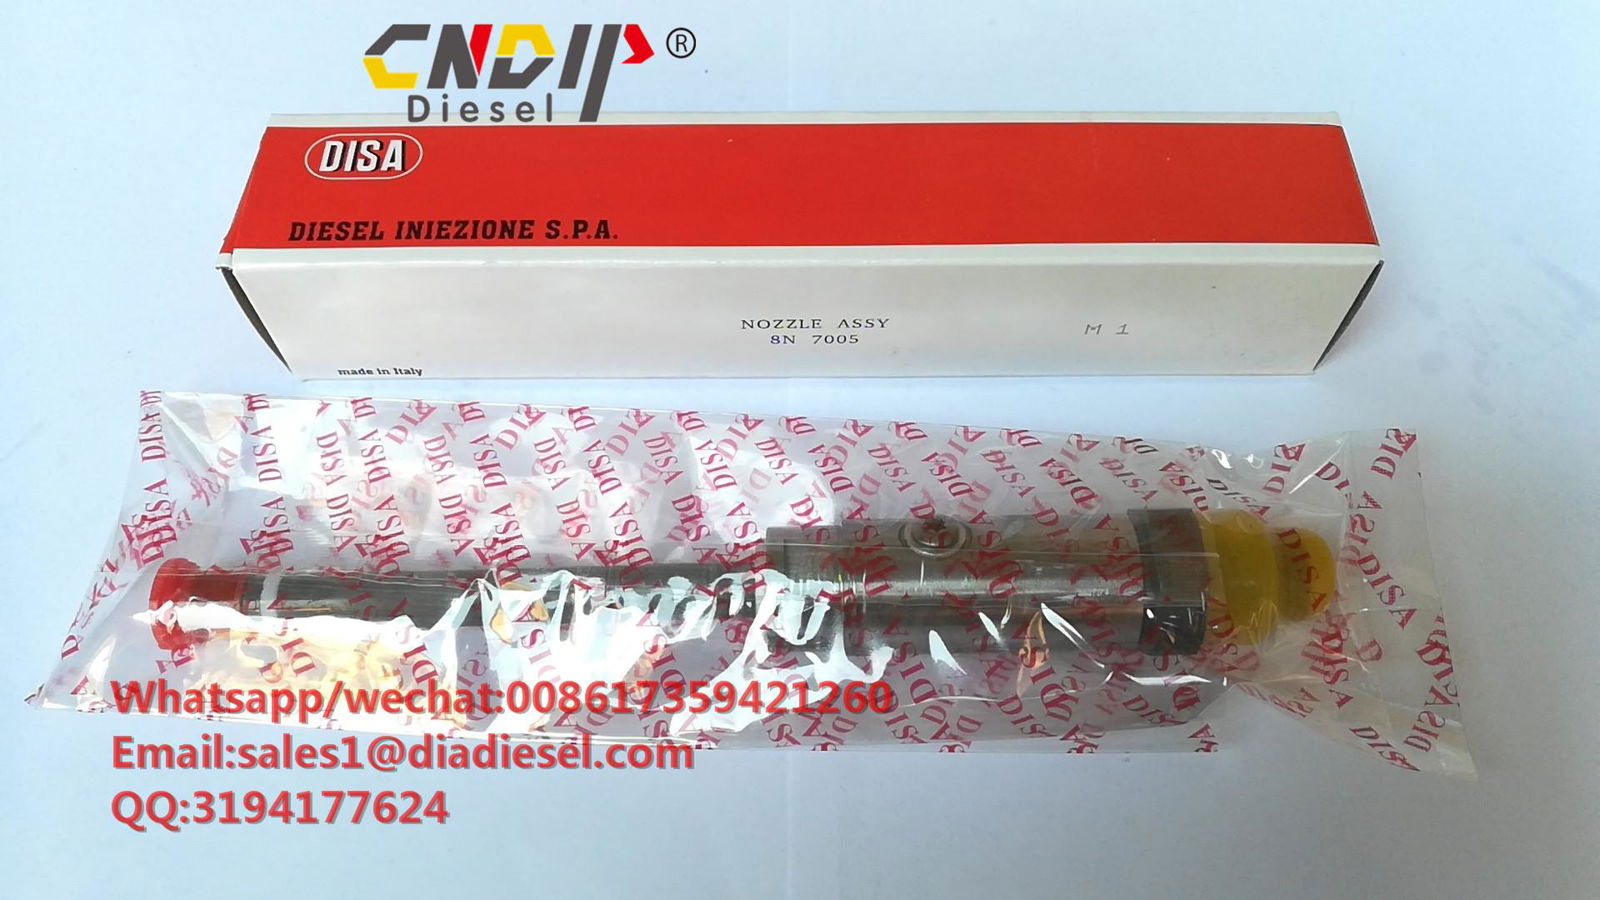 High Quality Diesel Fuel Injector Pencil Nozzle 8N7005 for sale 2